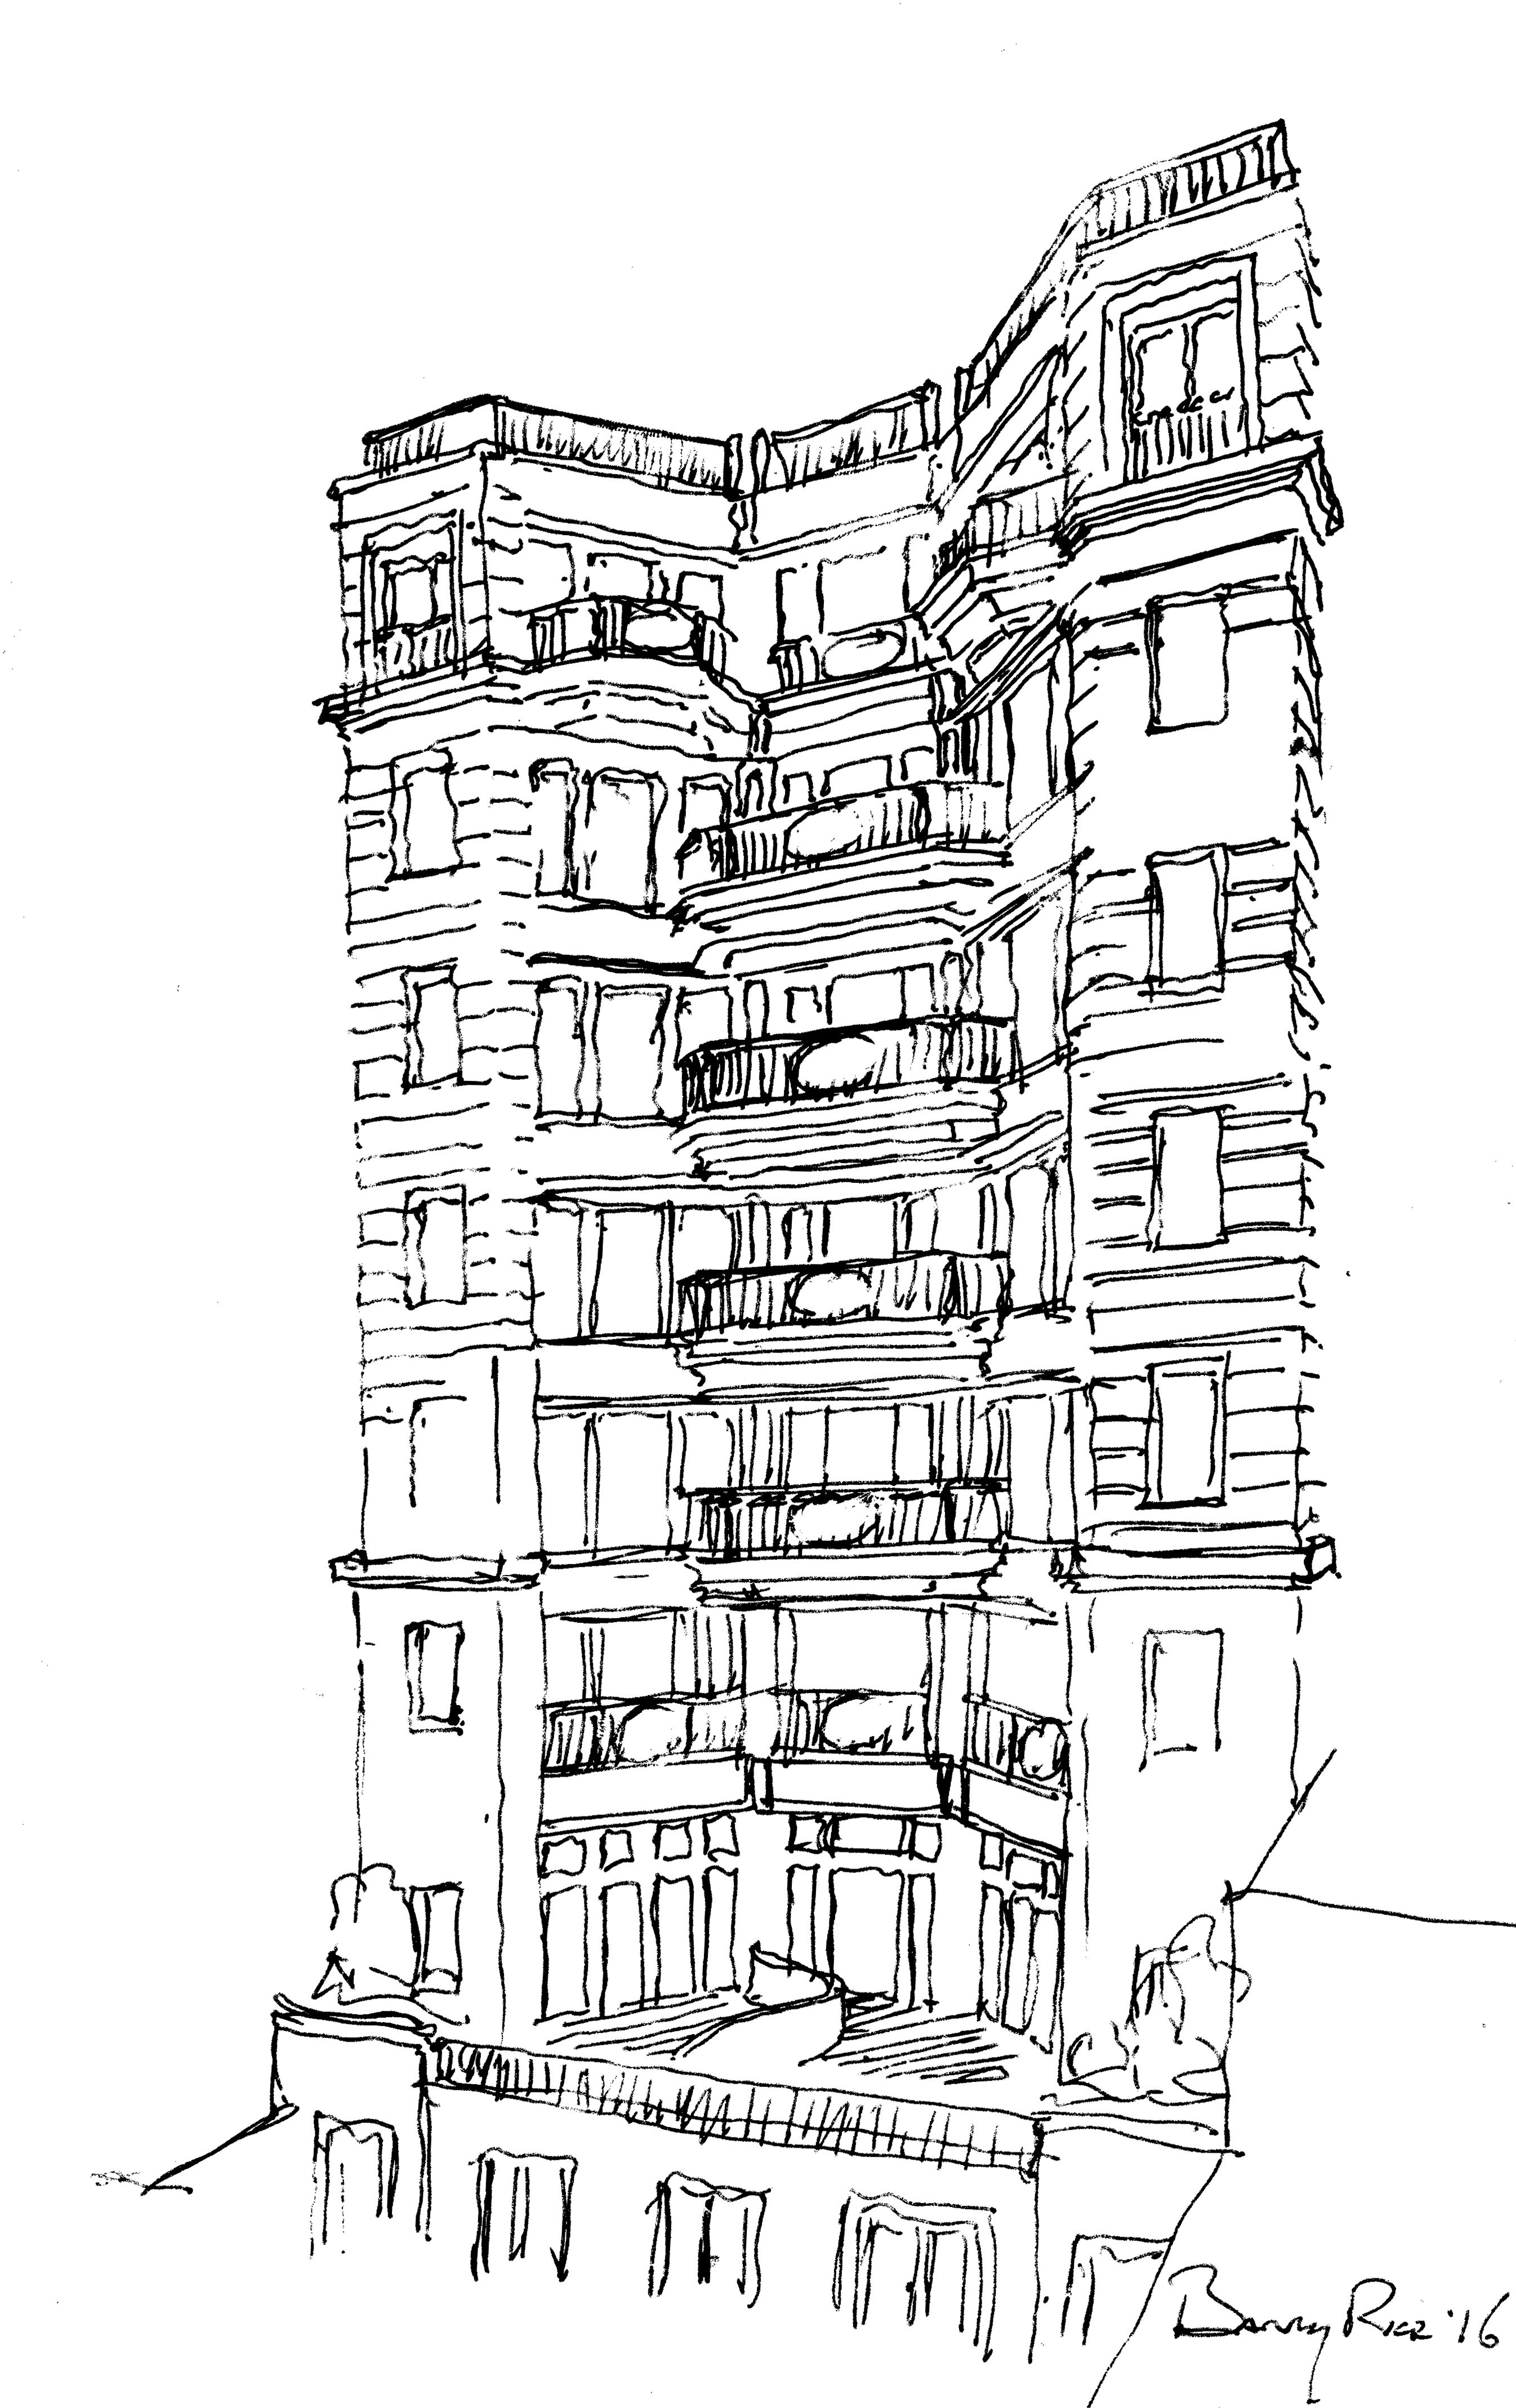 164 West 74th Street, sketch by Barry Rice Architects164 West 74th Street, sketch by Barry Rice Architects